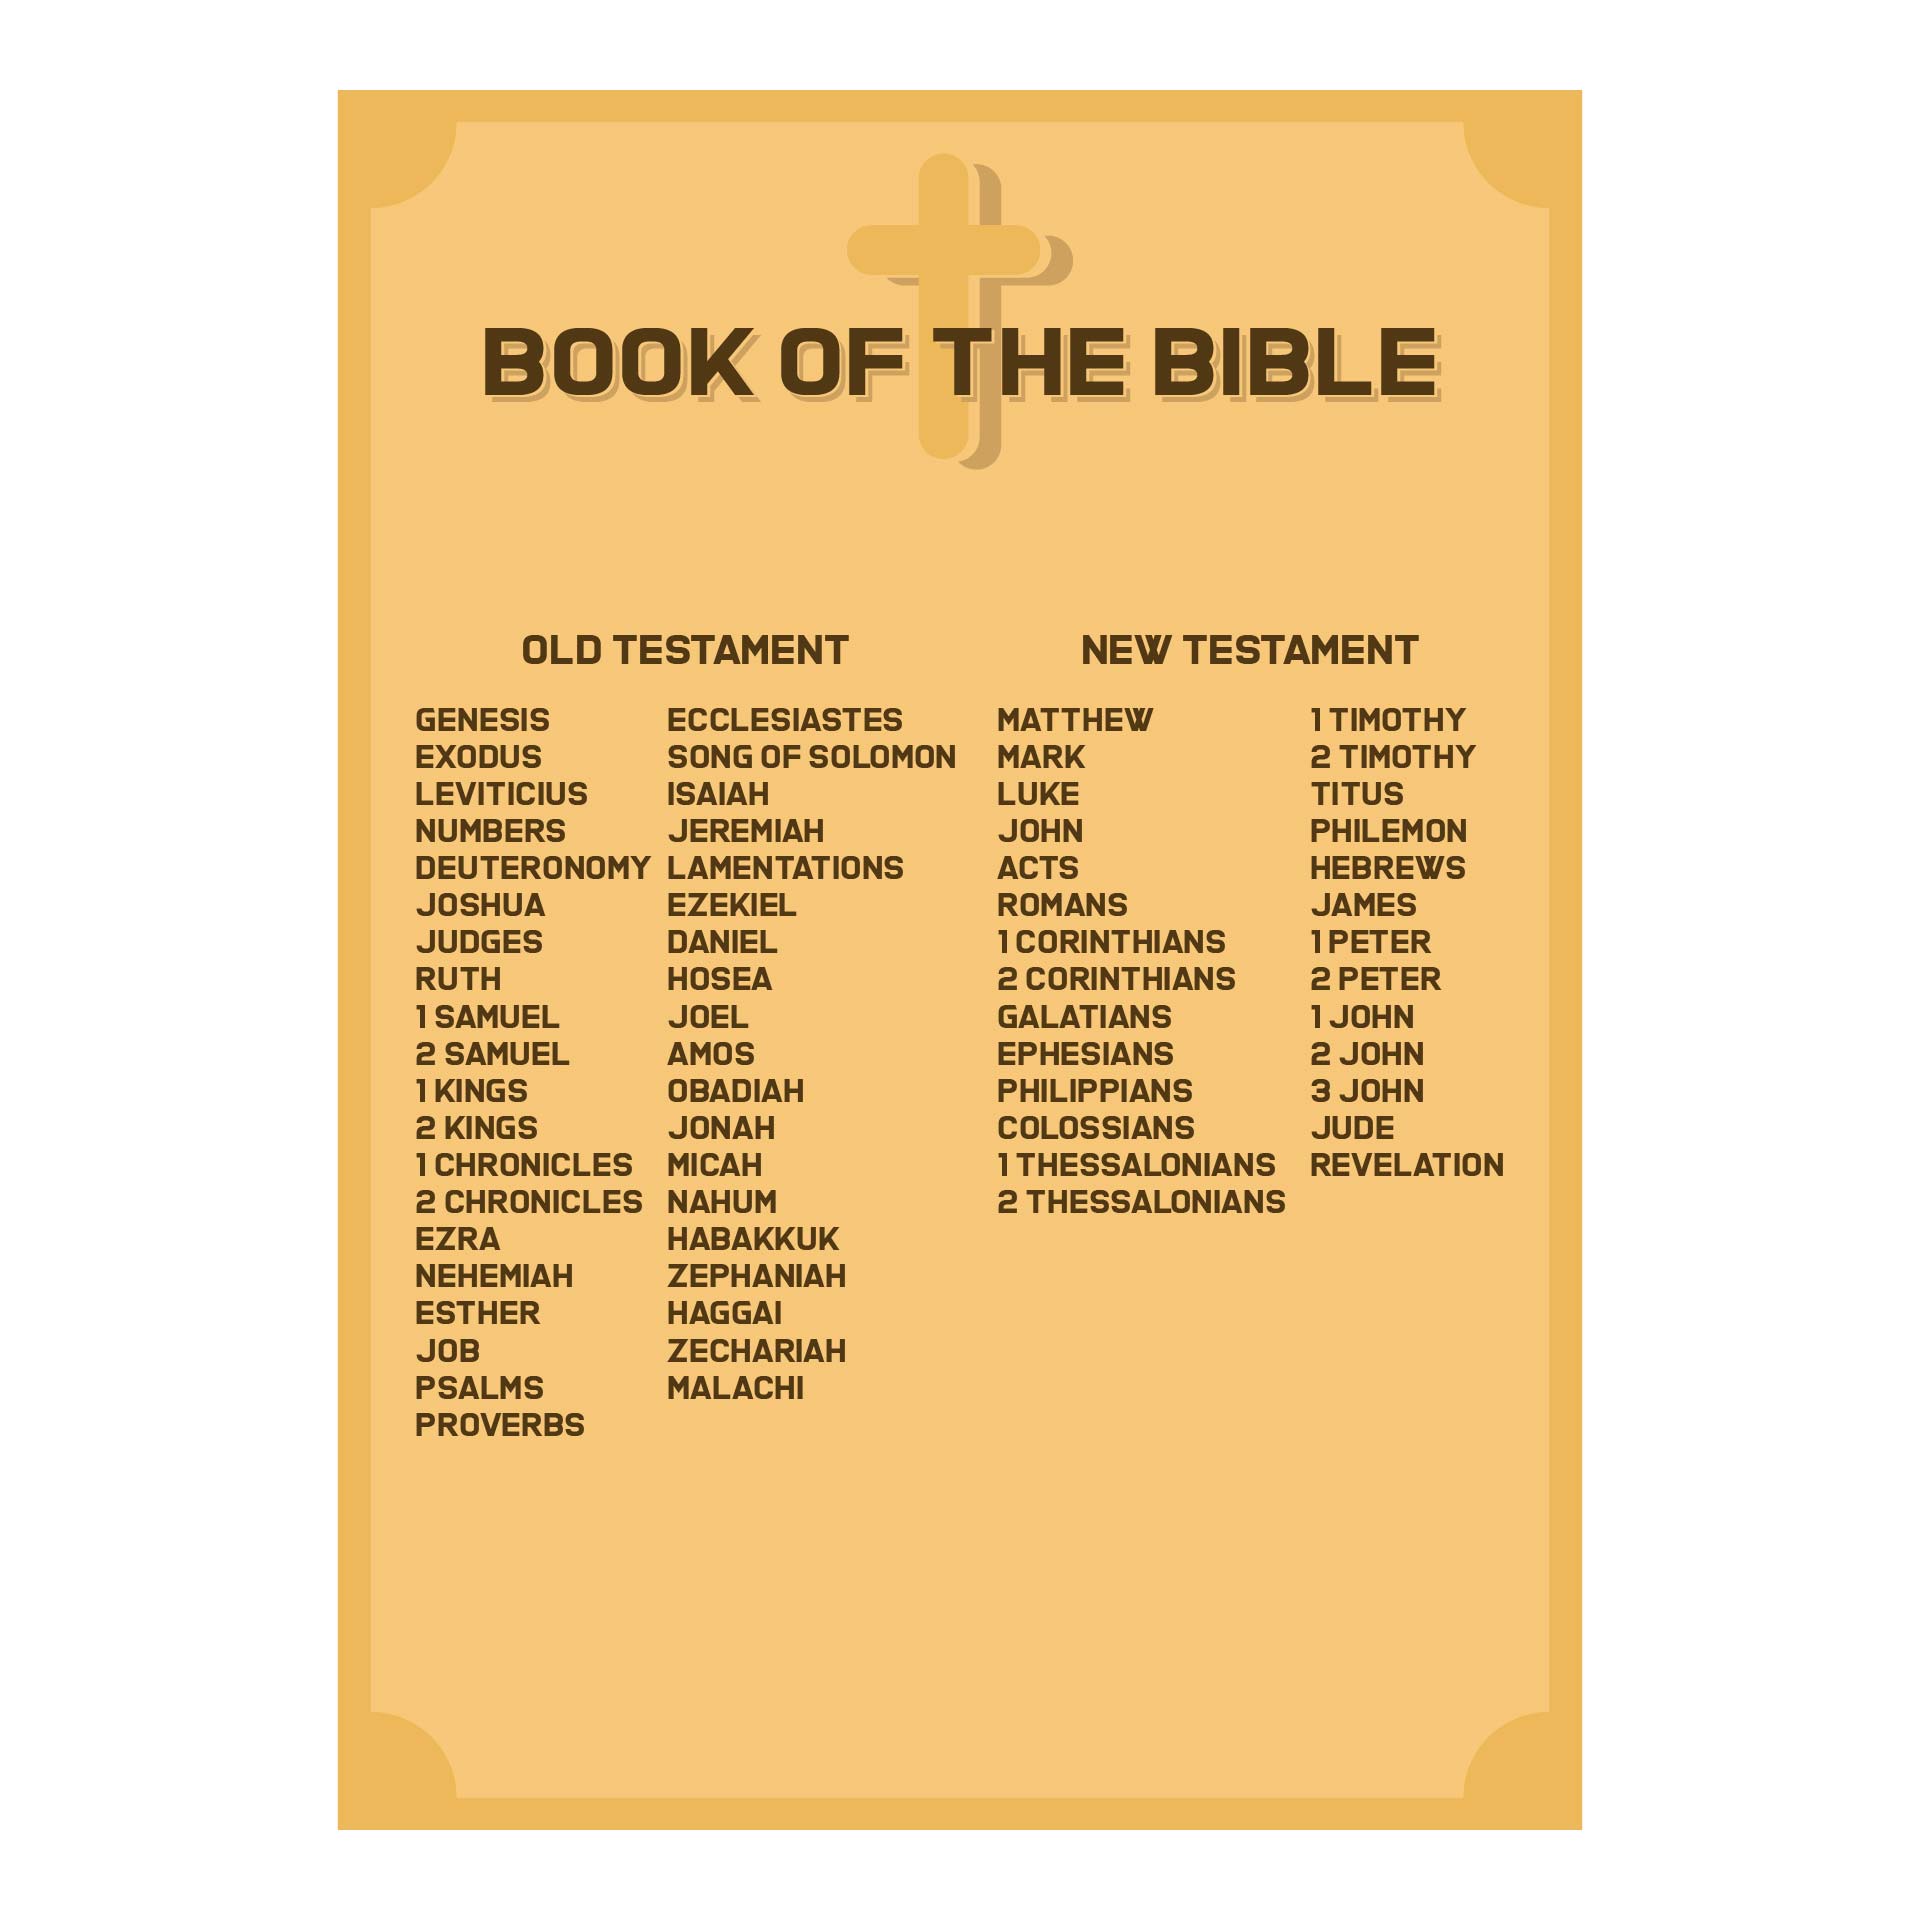 8 Best Images Of Books Of Bible Chart Printable Free Printable Bible Books PDF List The Books 